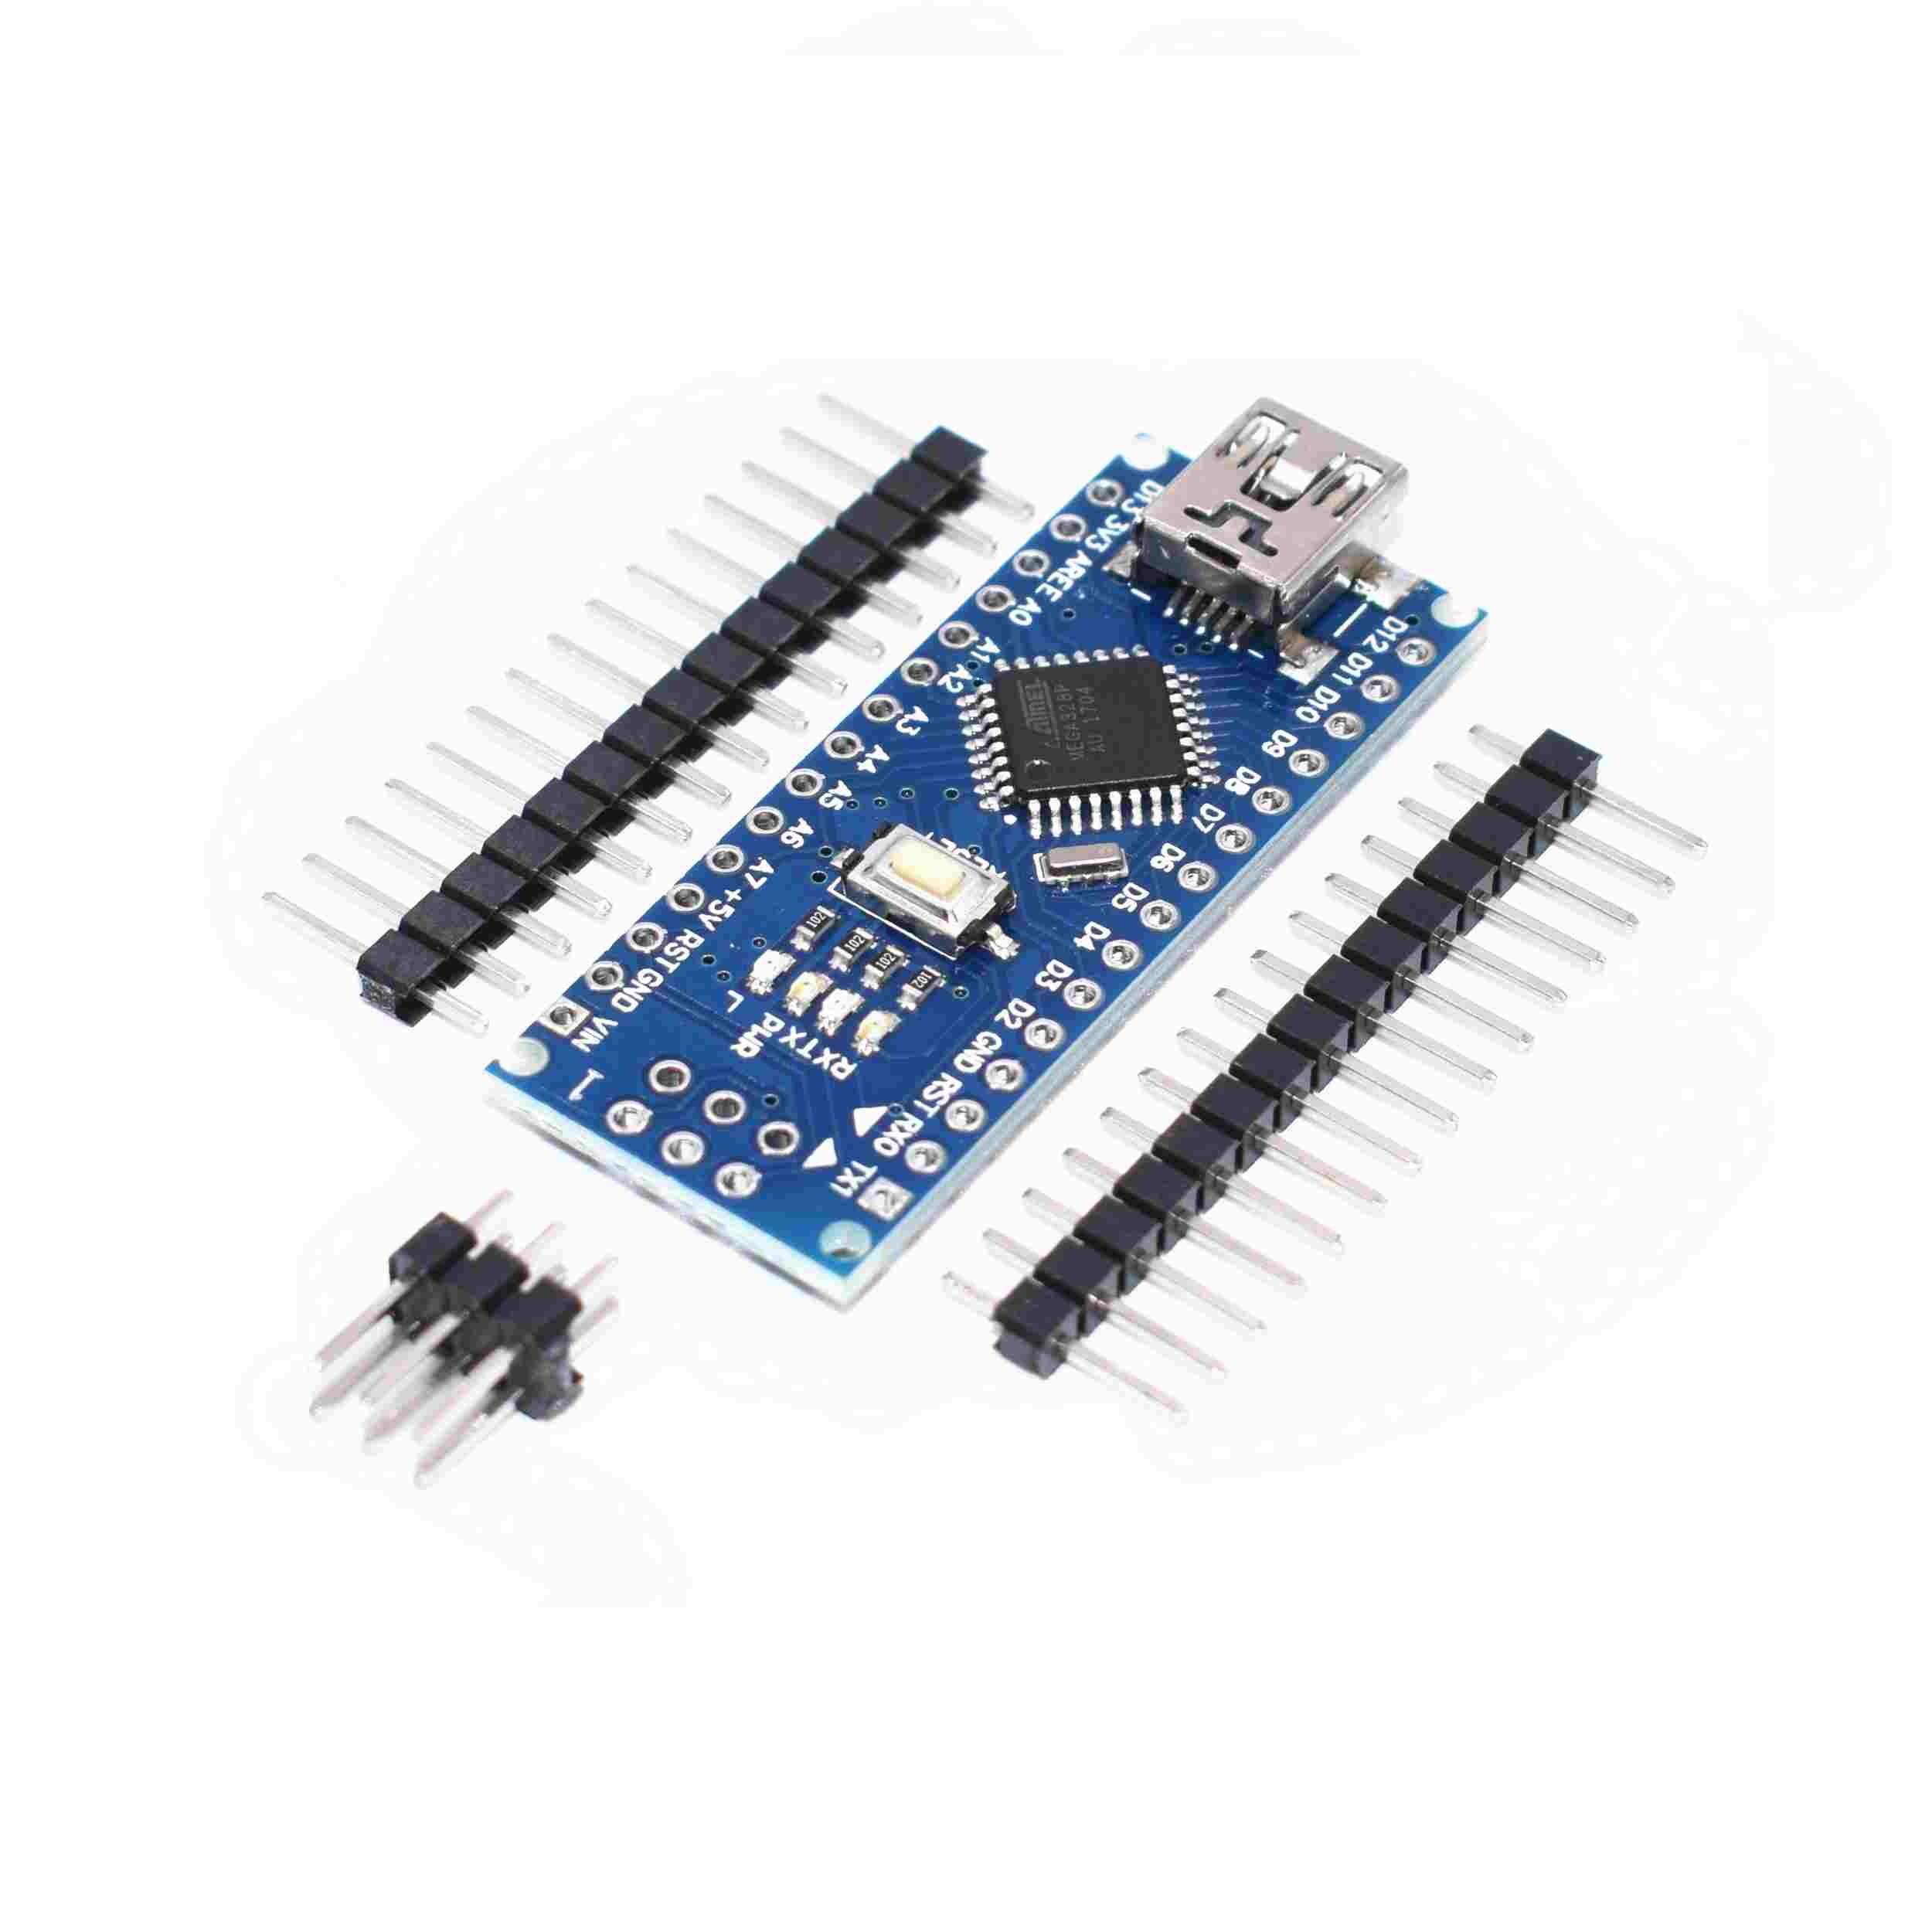 Chip　Price　w/　Lowest　Nano　CH340　Buy　INDIA　at　Arduino　R3　in